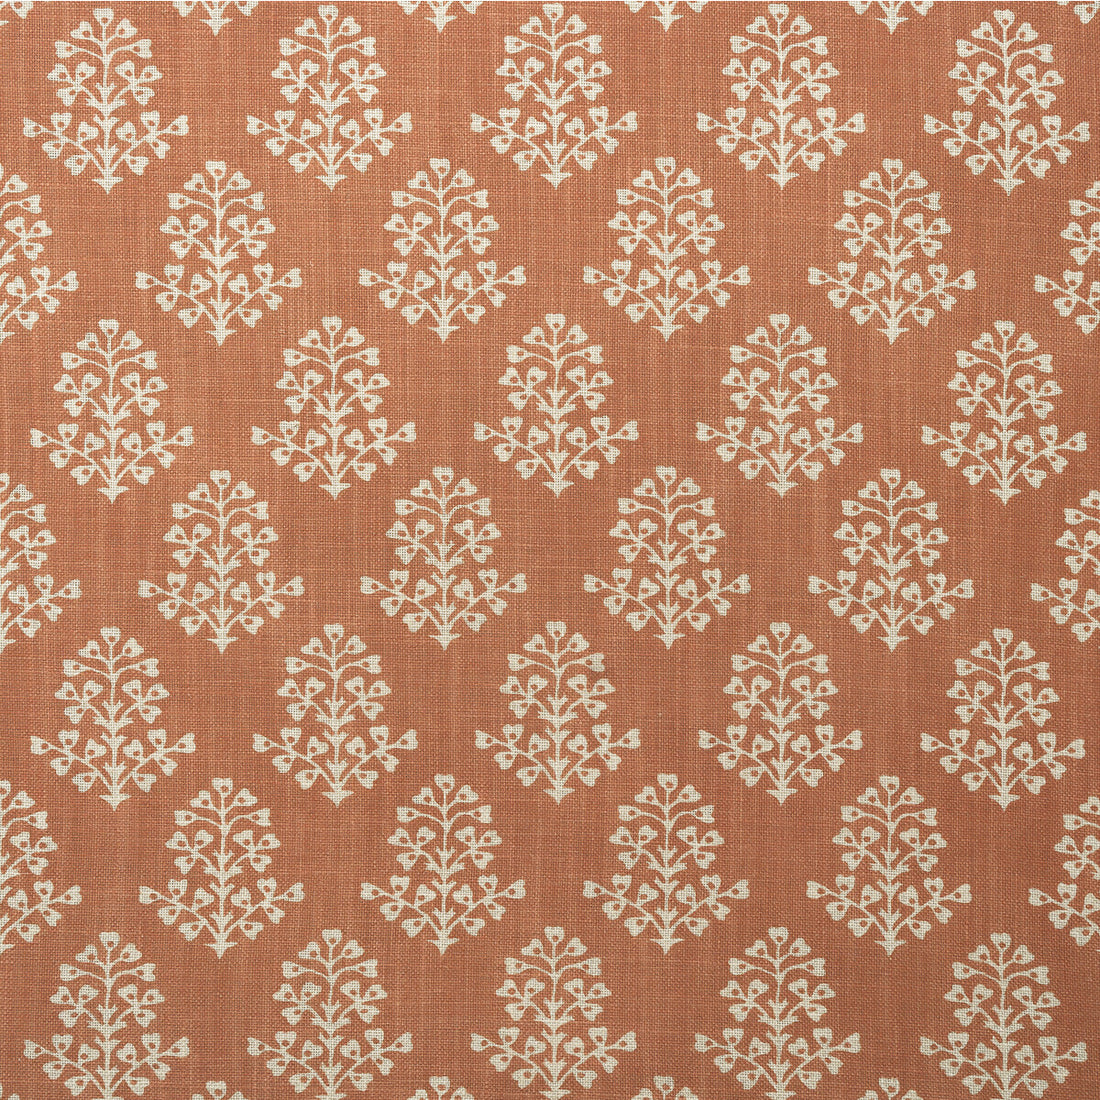 Sprig fabric in orange color - pattern AM100384.12.0 - by Kravet Couture in the Andrew Martin Garden Path collection